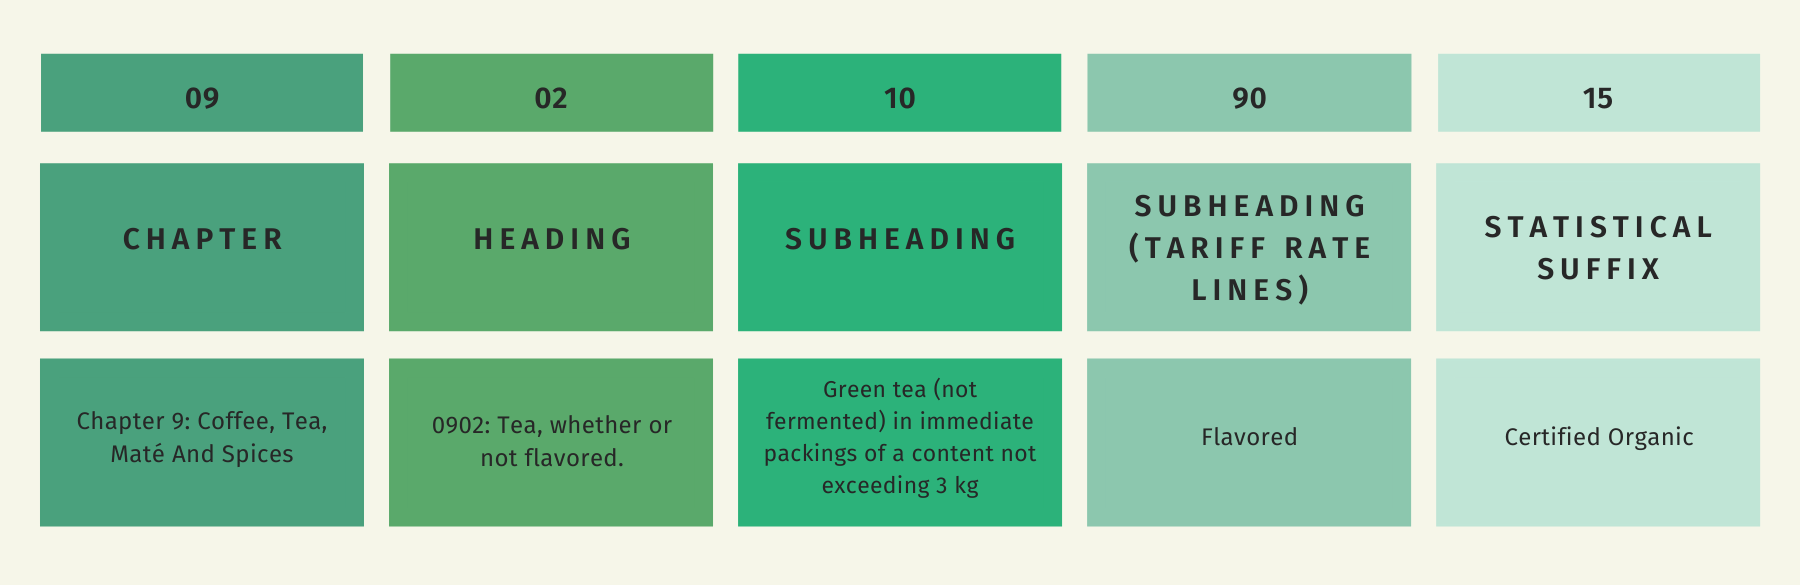 Chart of HTS code structure for organic flavored green tea